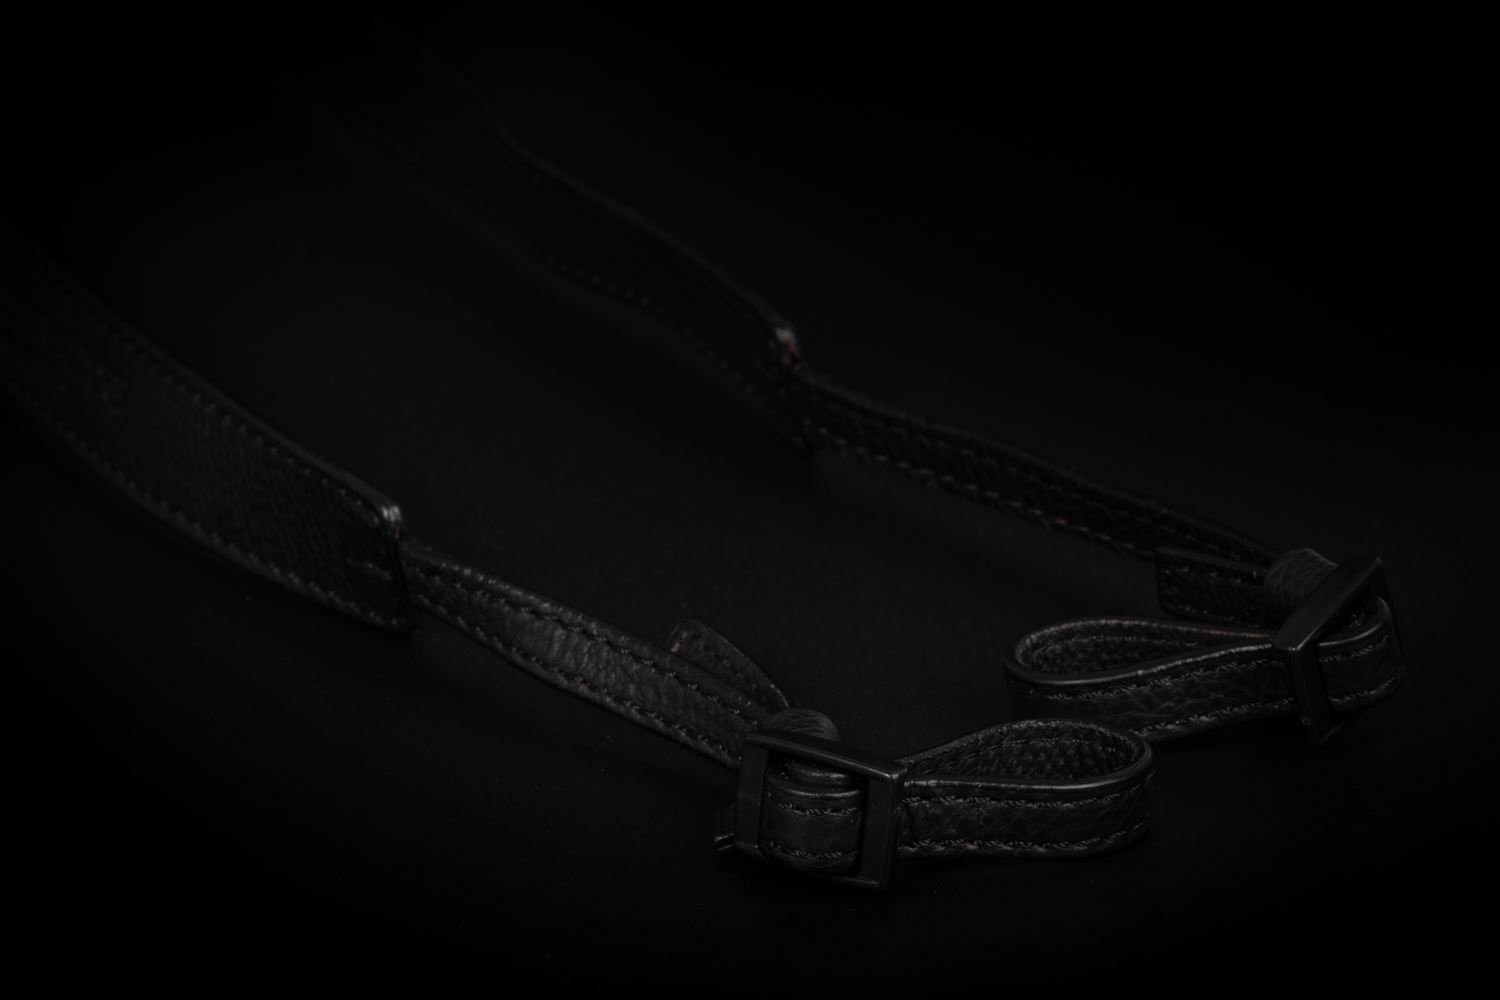 Picture of Angelo Pelle Neck Strap, Ferrara SL - Black with Real Crocodile Grey Loops